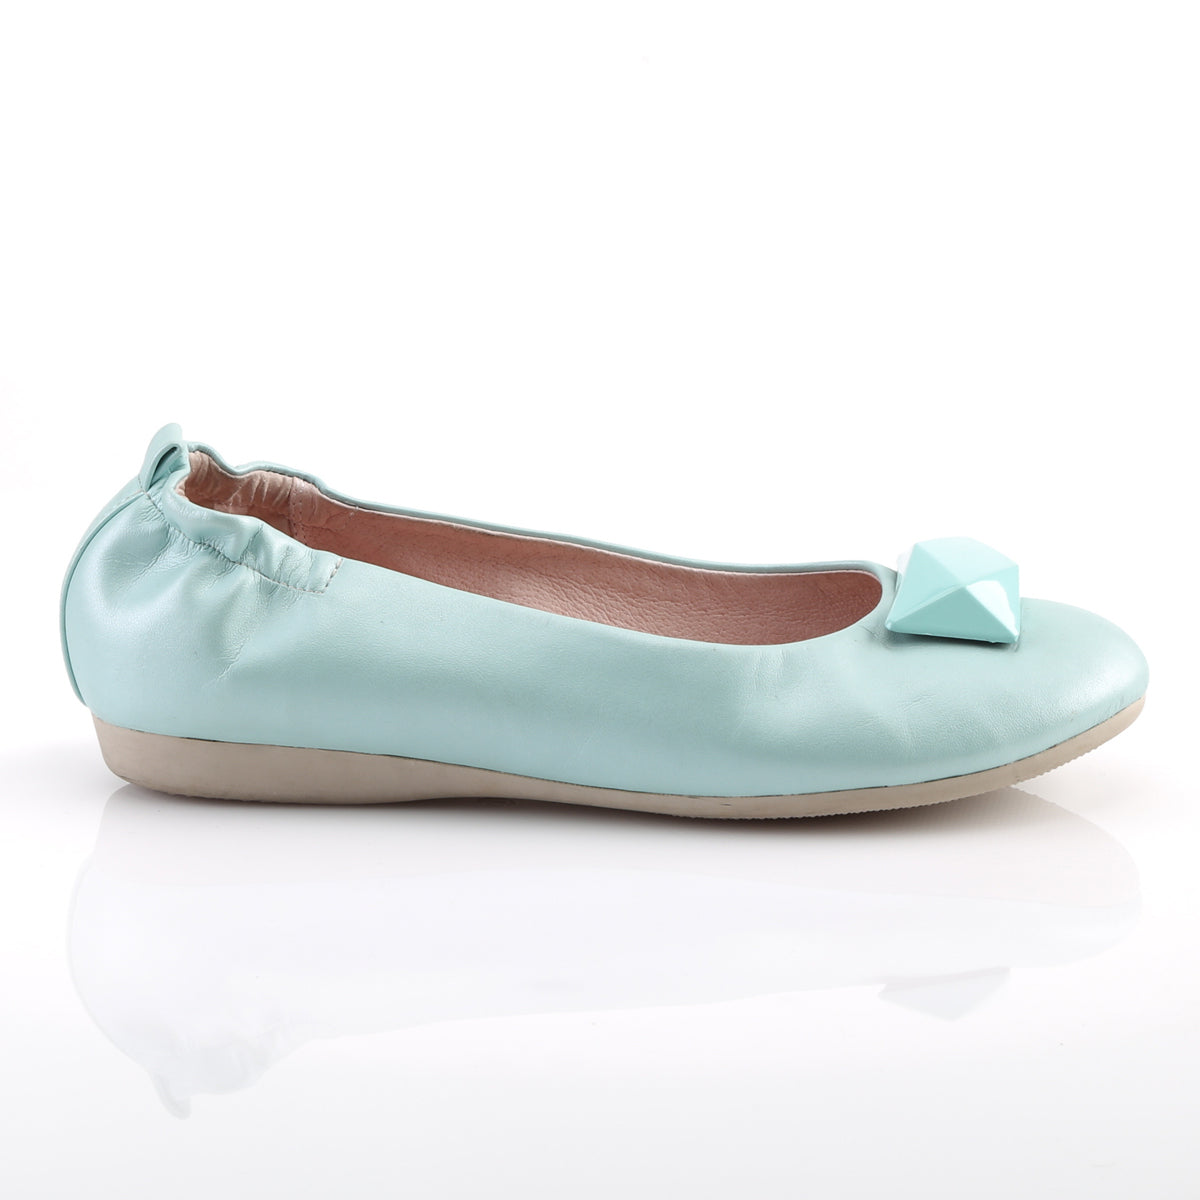 OLIVE-08 Pin Up Couture Aqua Faux Leather Single Soles [Retro Glamour Shoes]